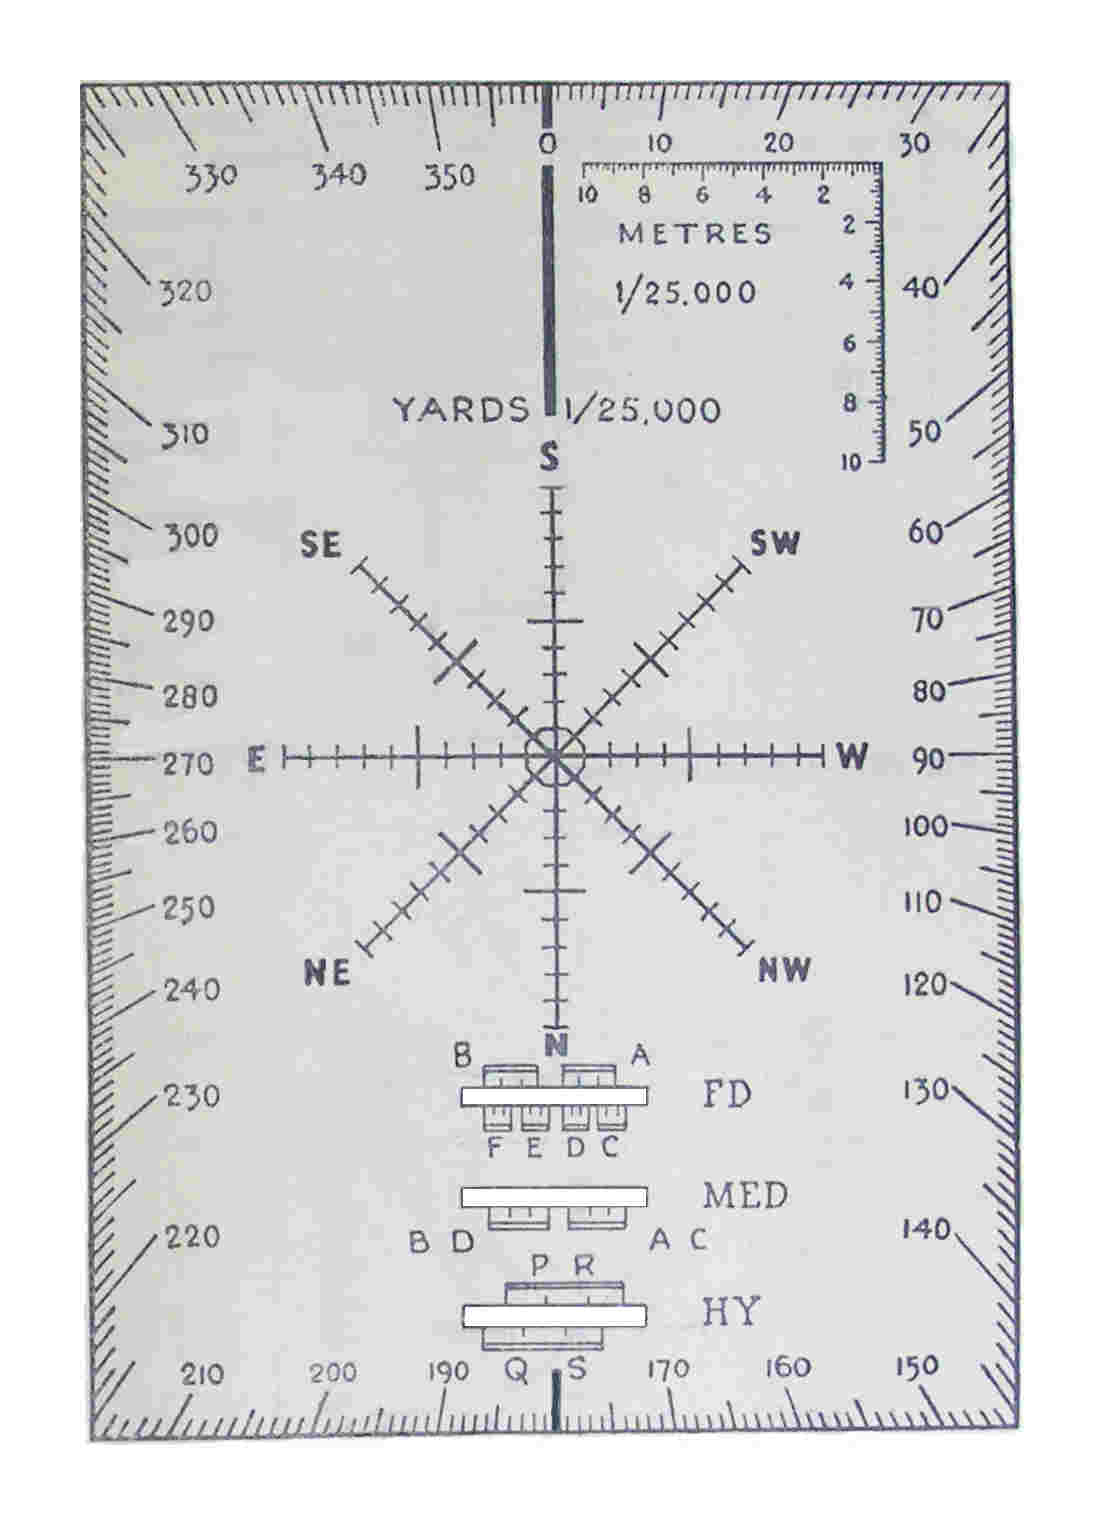 Protractor for plotting cardianl point corrections and standard stonks